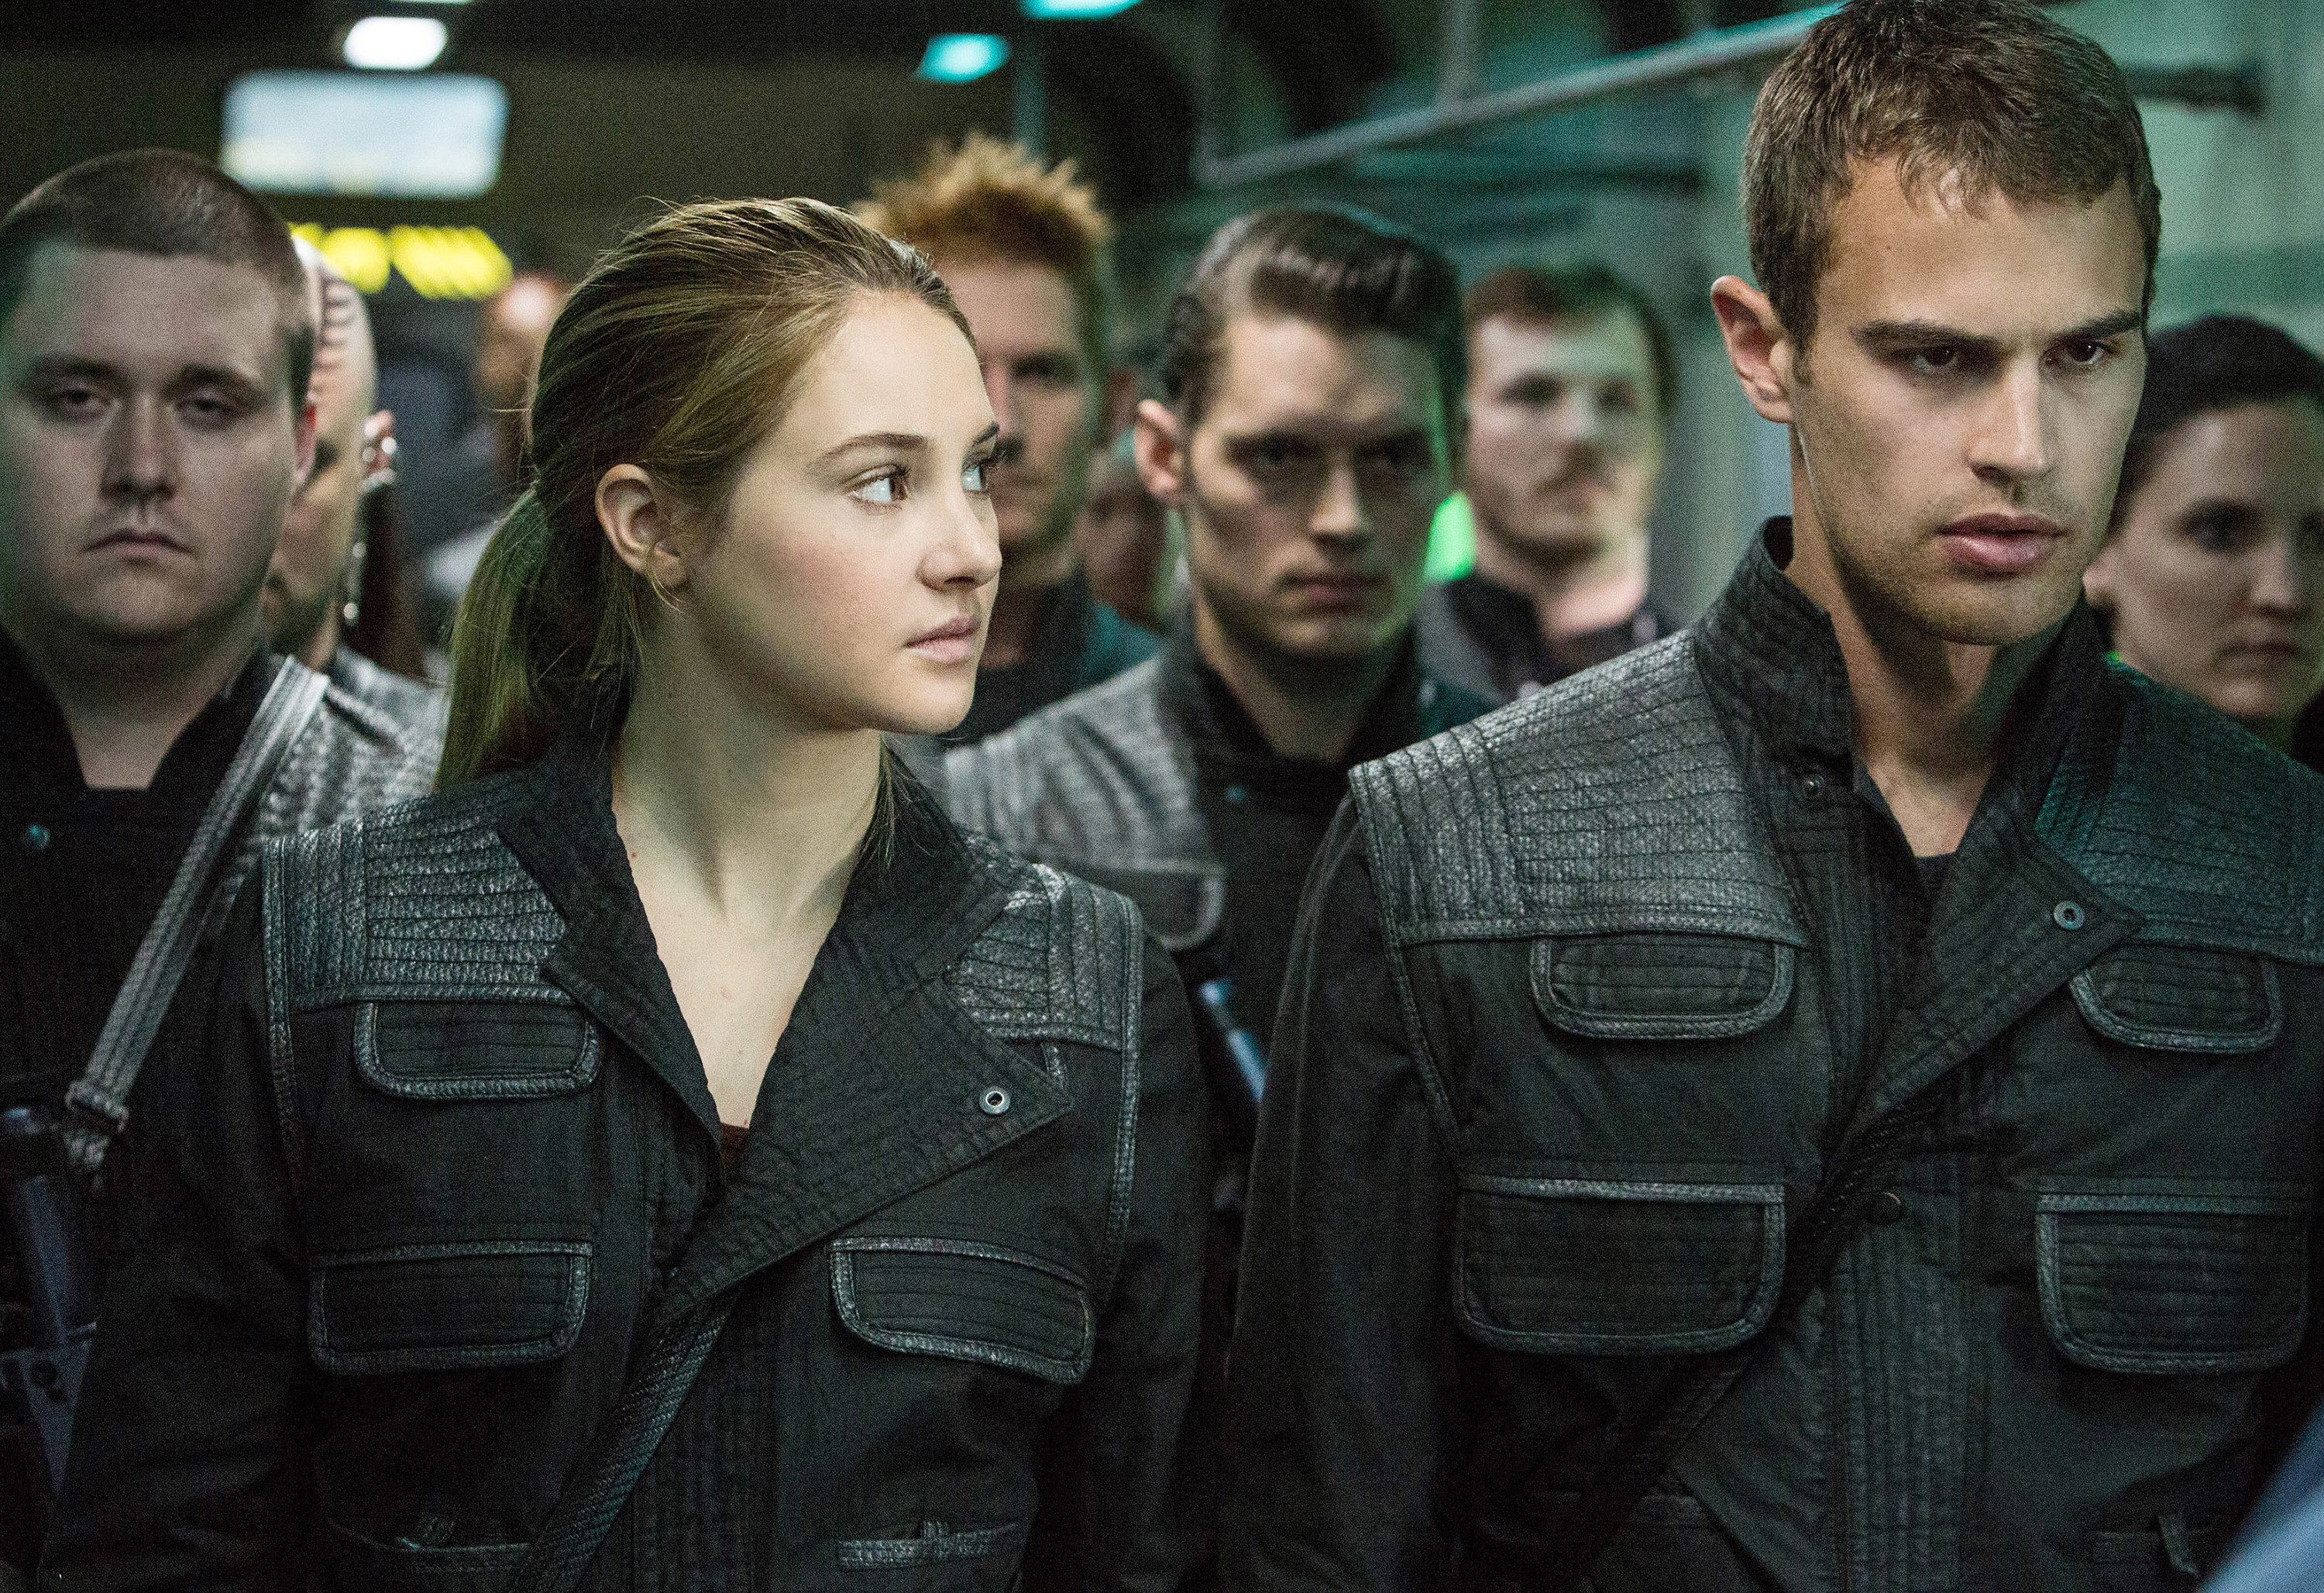 Shailene Woodley looks at Theo James as they wear matching black outfits